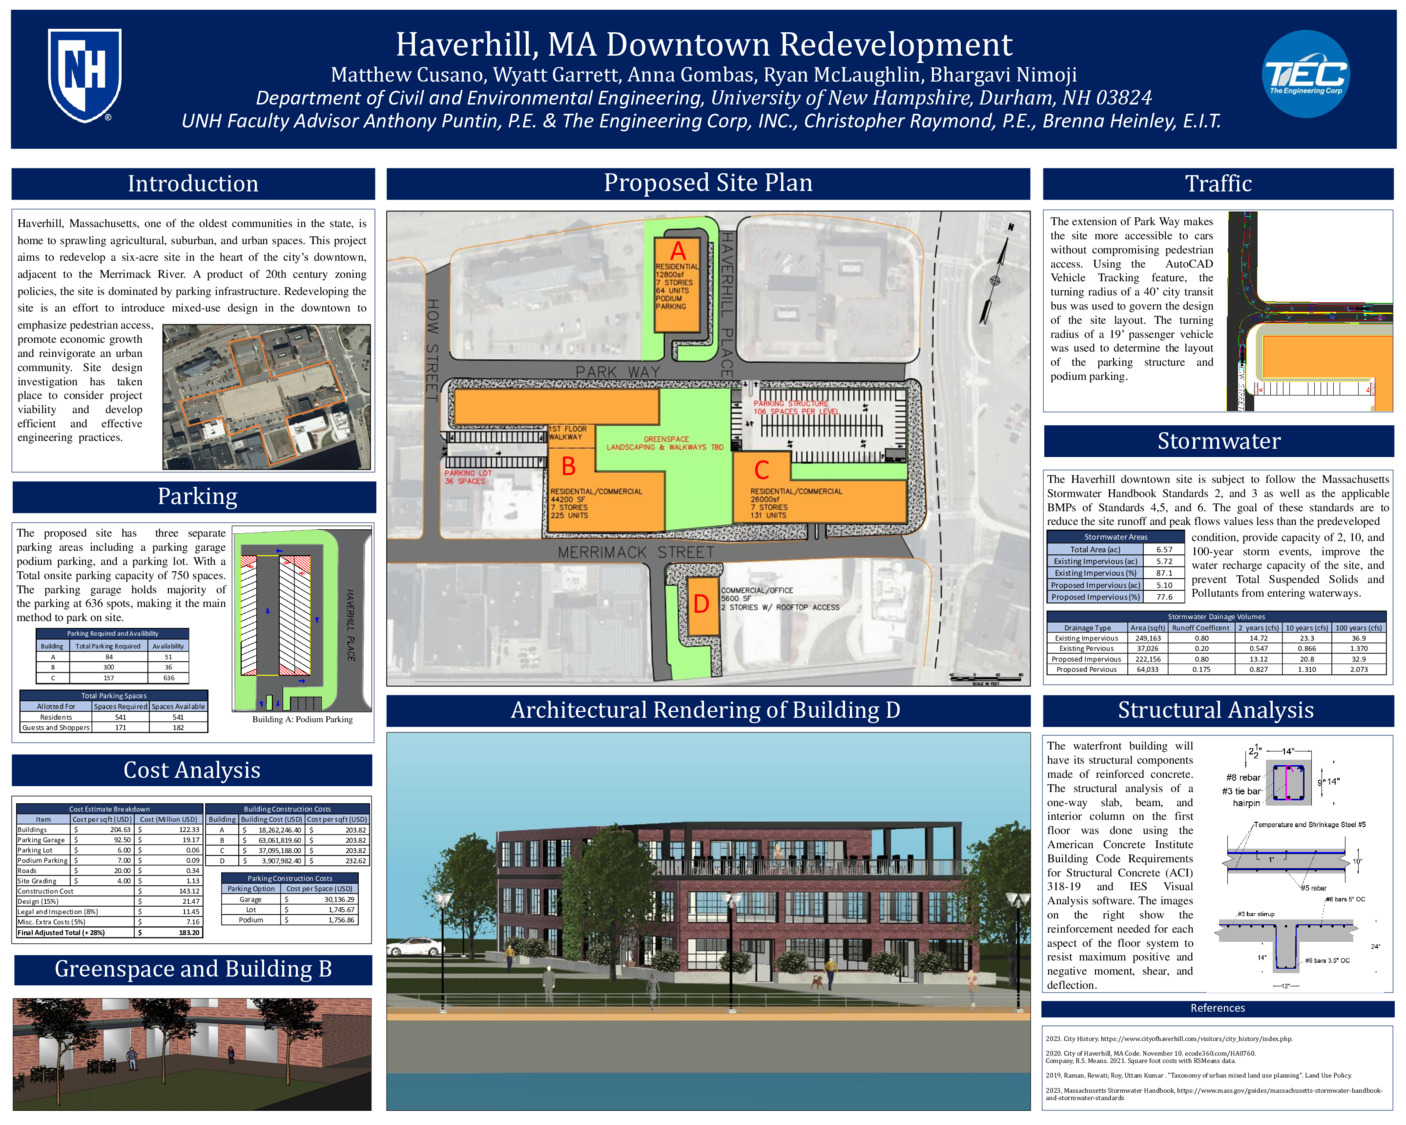 Haverhill Downtown Redevelopment by wjg1017